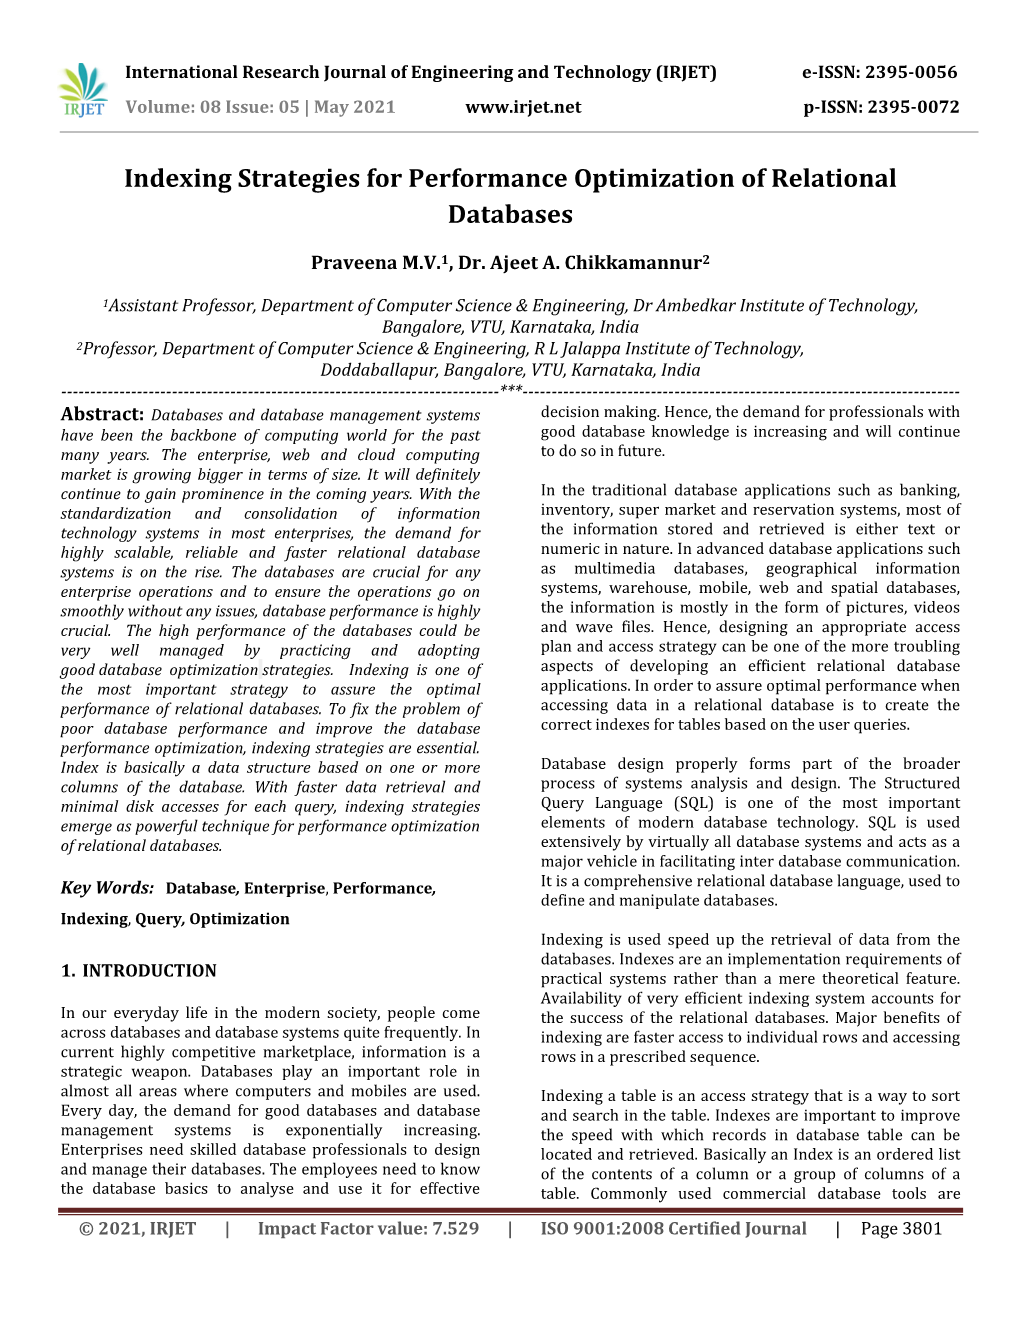 Indexing Strategies for Performance Optimization of Relational Databases